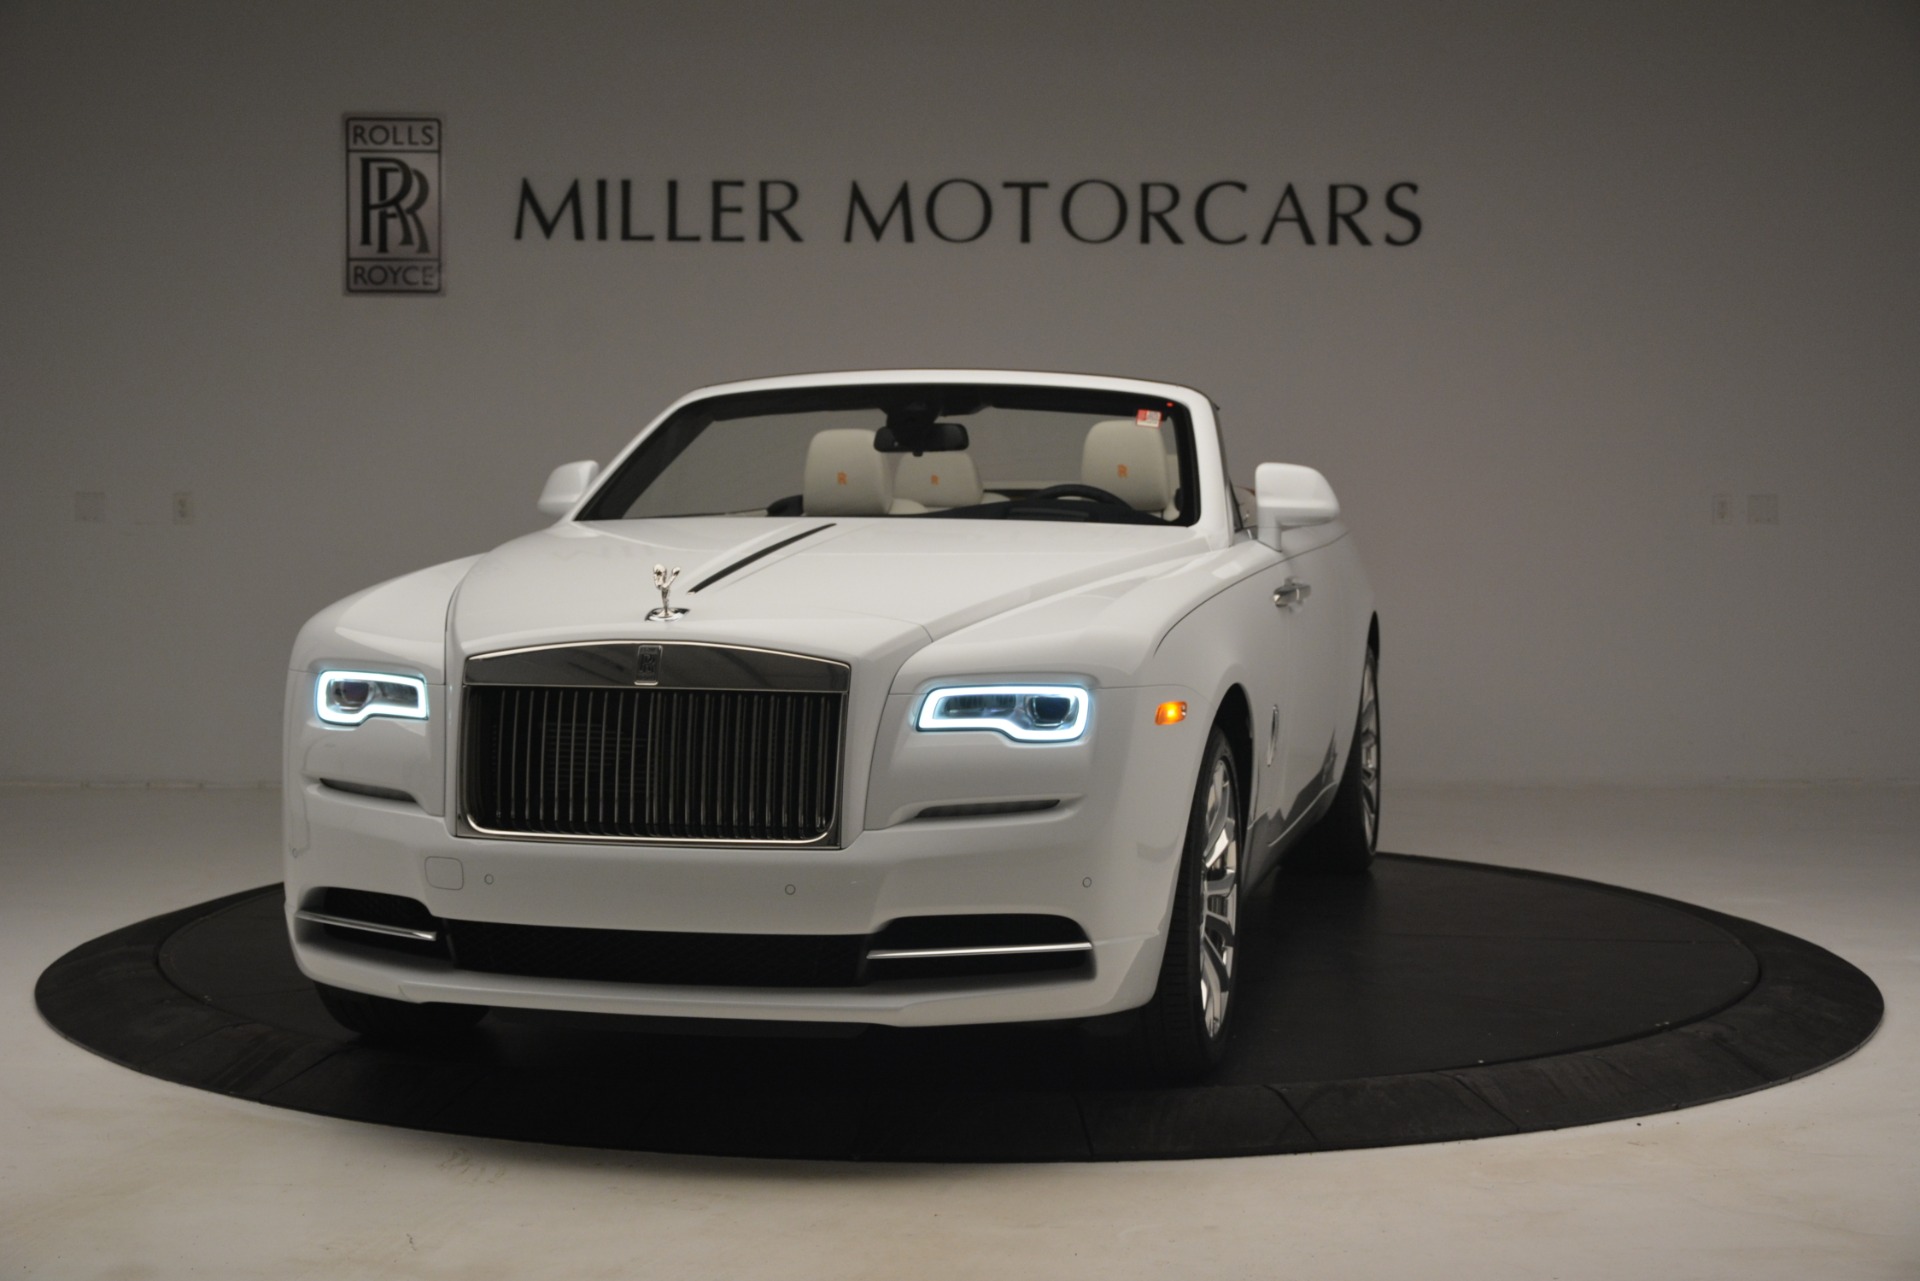 Used 2019 Rolls-Royce Dawn for sale Sold at Aston Martin of Greenwich in Greenwich CT 06830 1